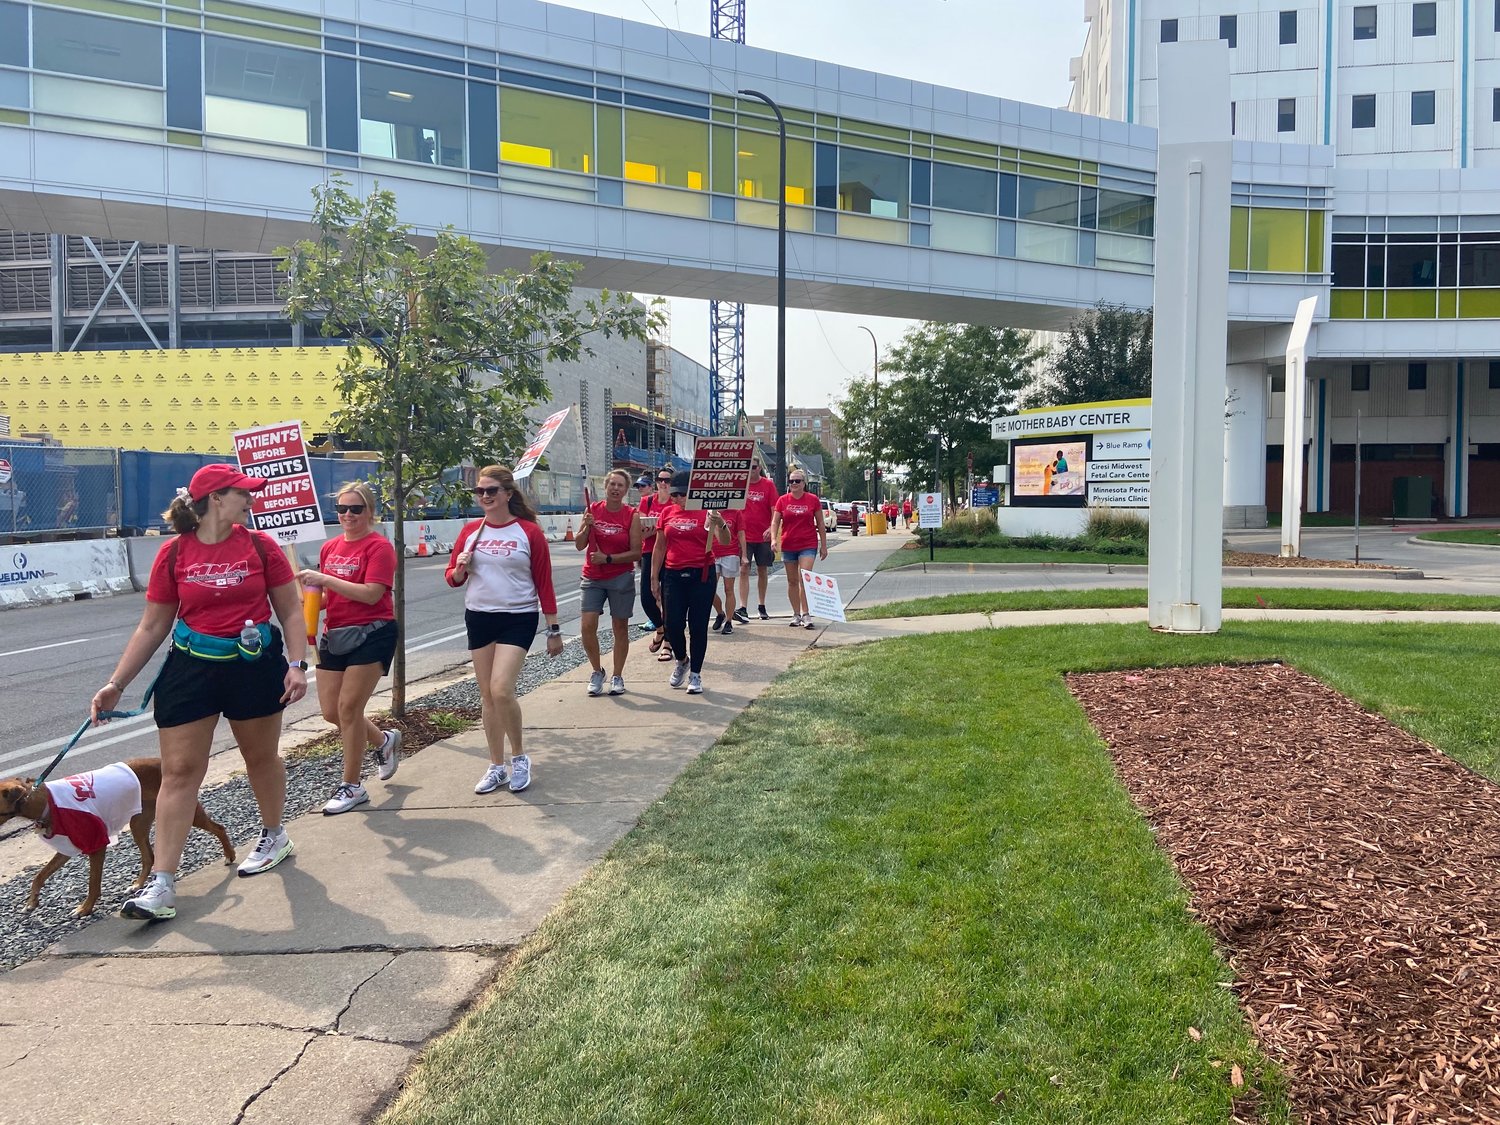 MNA nurses walking the picket line as they protest for better staffing and appropriate patient care at Children's Hospital Minnesota - Minneapolis, 2525 Chicago Ave.